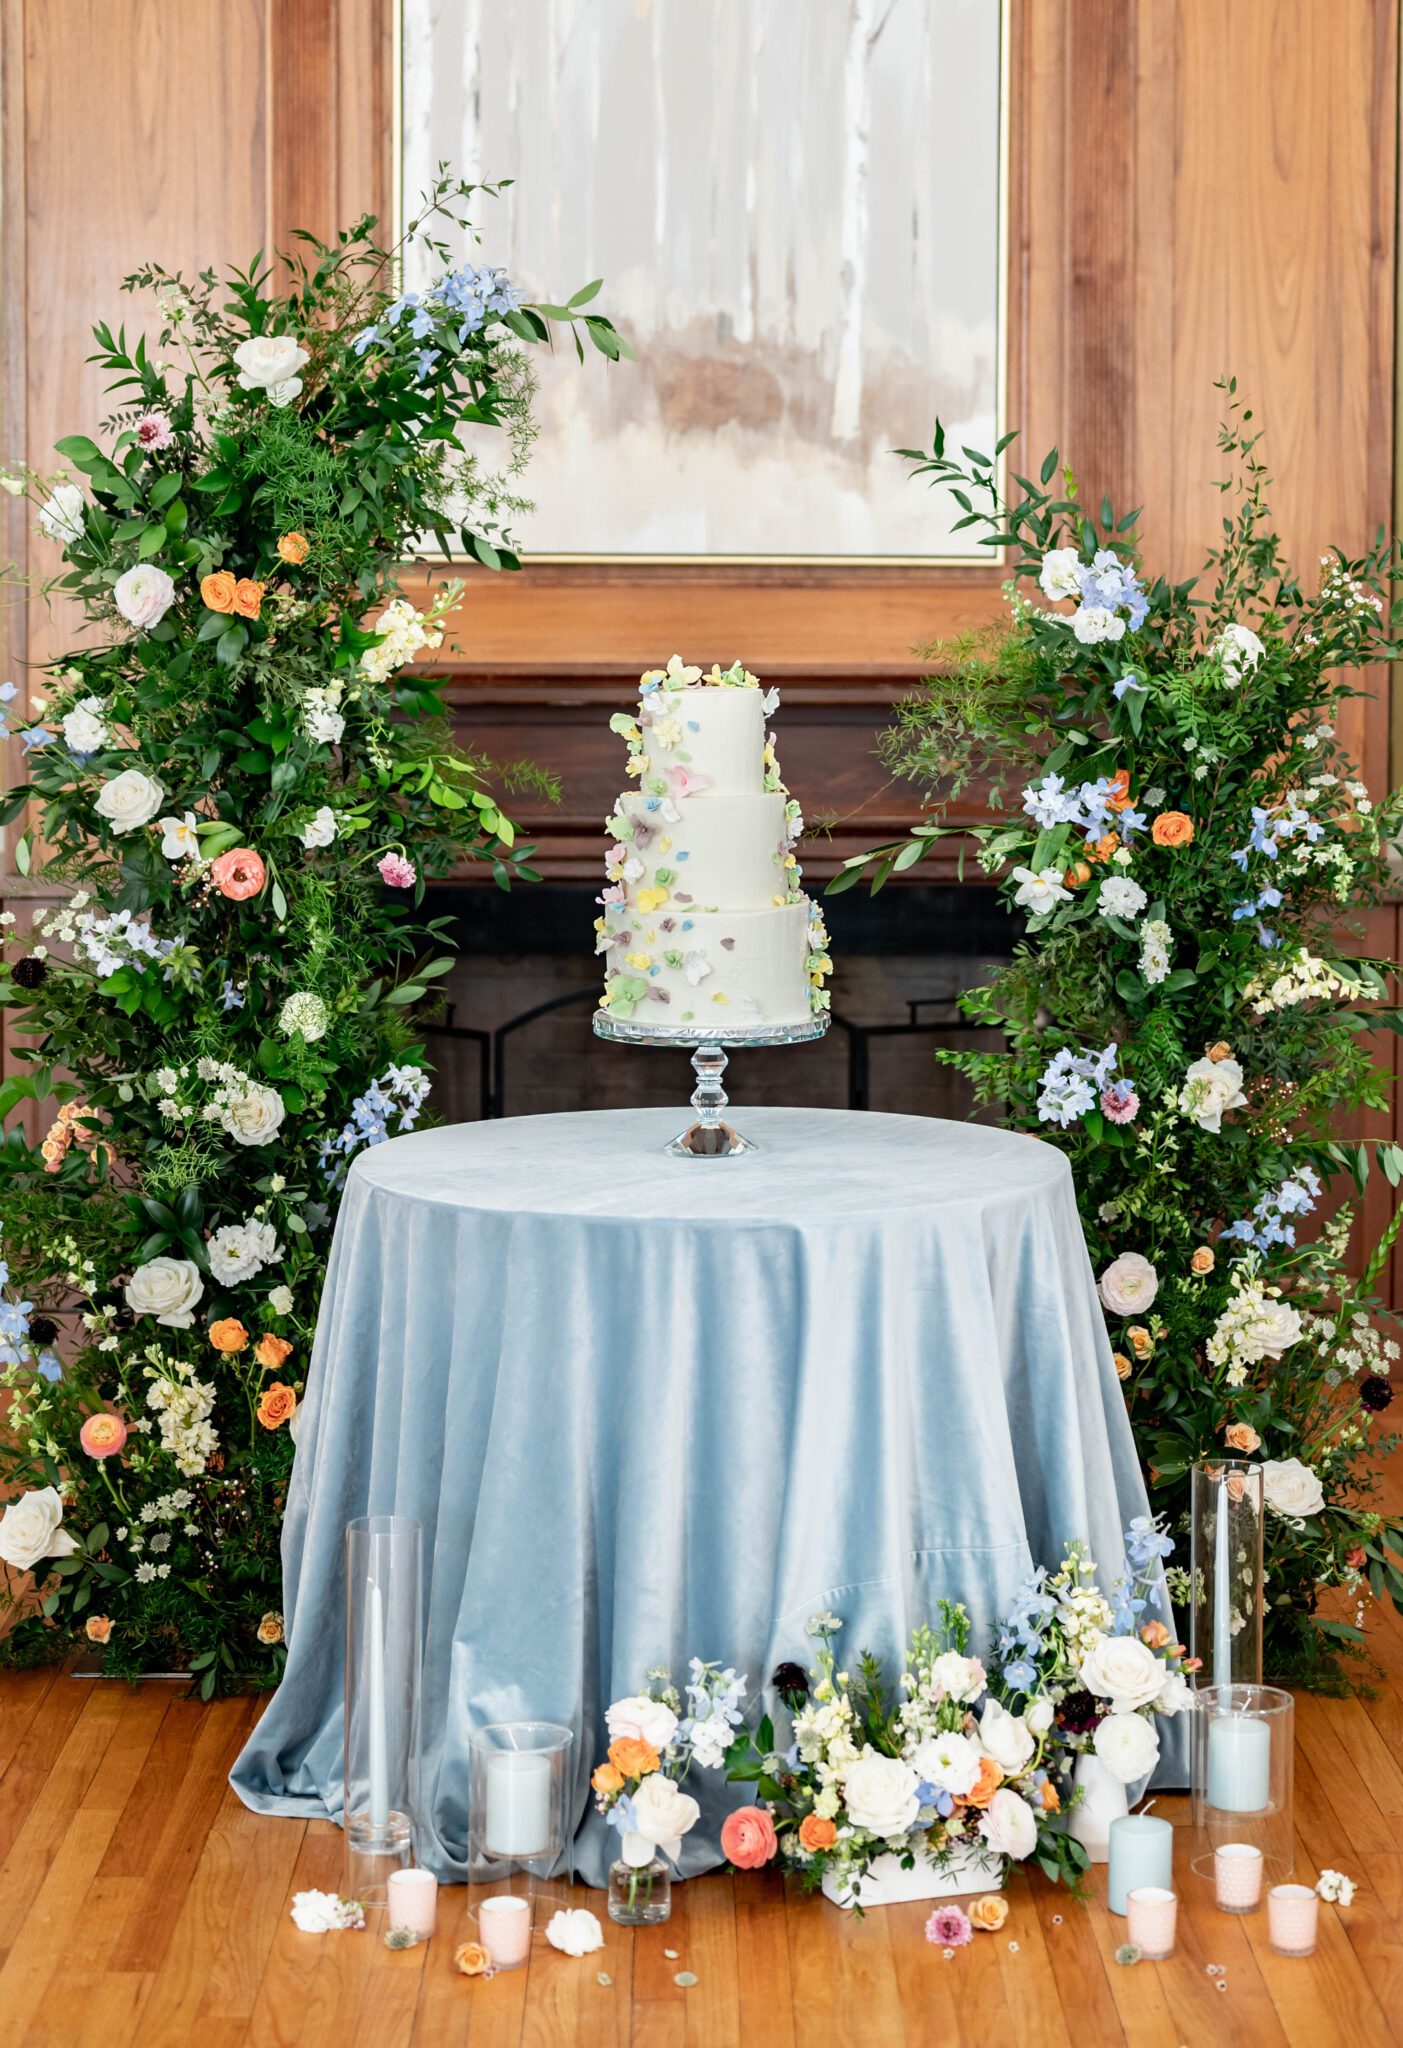 Stunning column floral arch with wildflowers and lush greenery behind dessert table, whimsical and romantic pastel wedding cake inspiration, baby blue velvet linens on dessert table